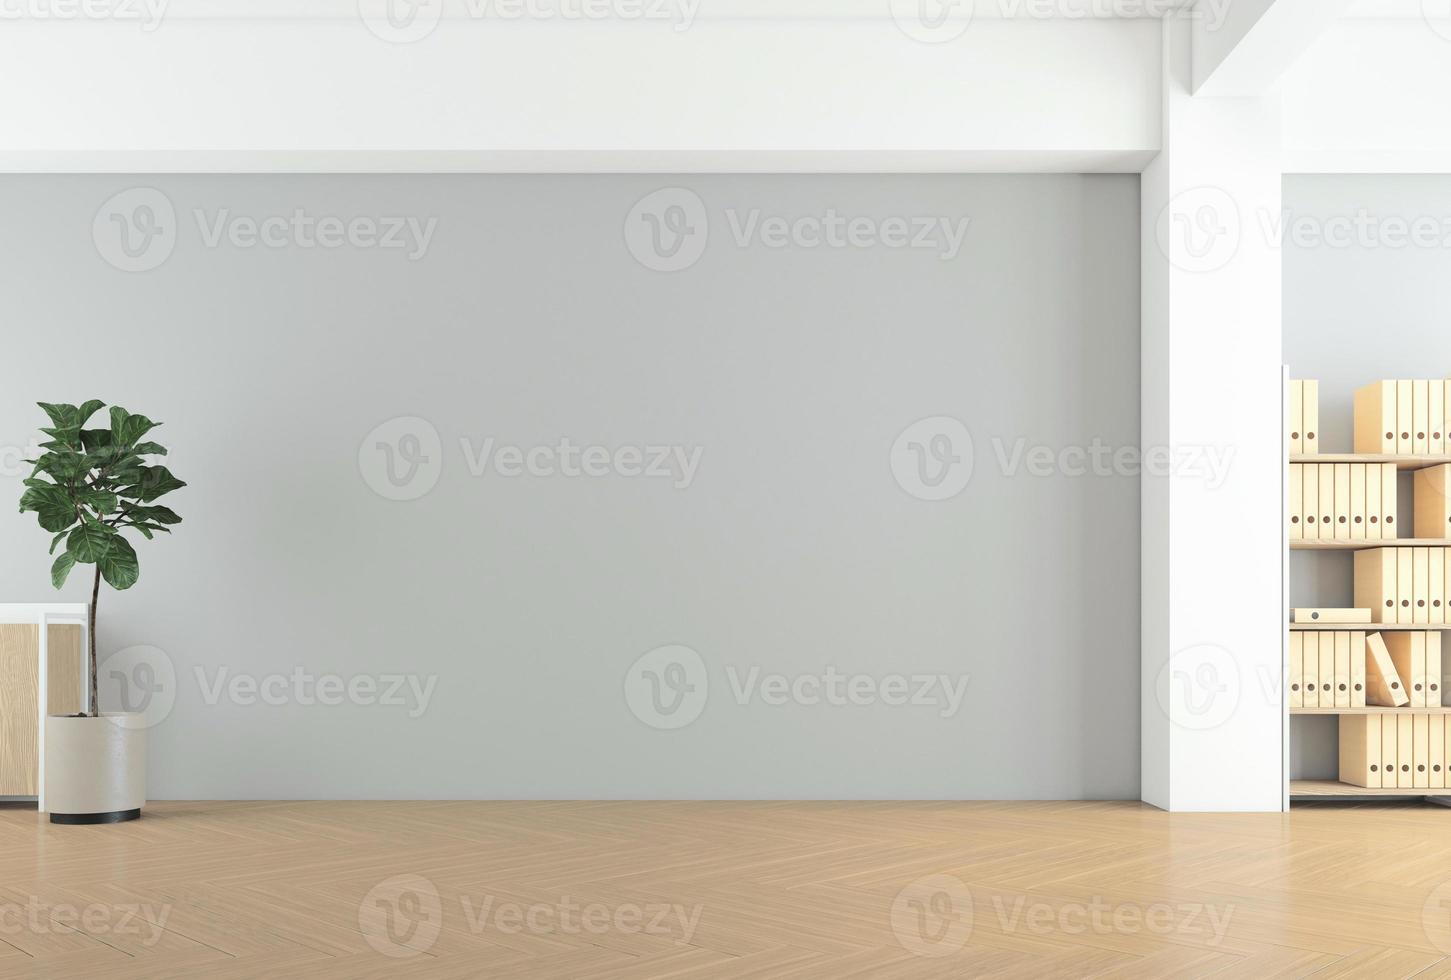 Empty room with minimalist furniture, gray wall and wood floor. 3d rendering photo